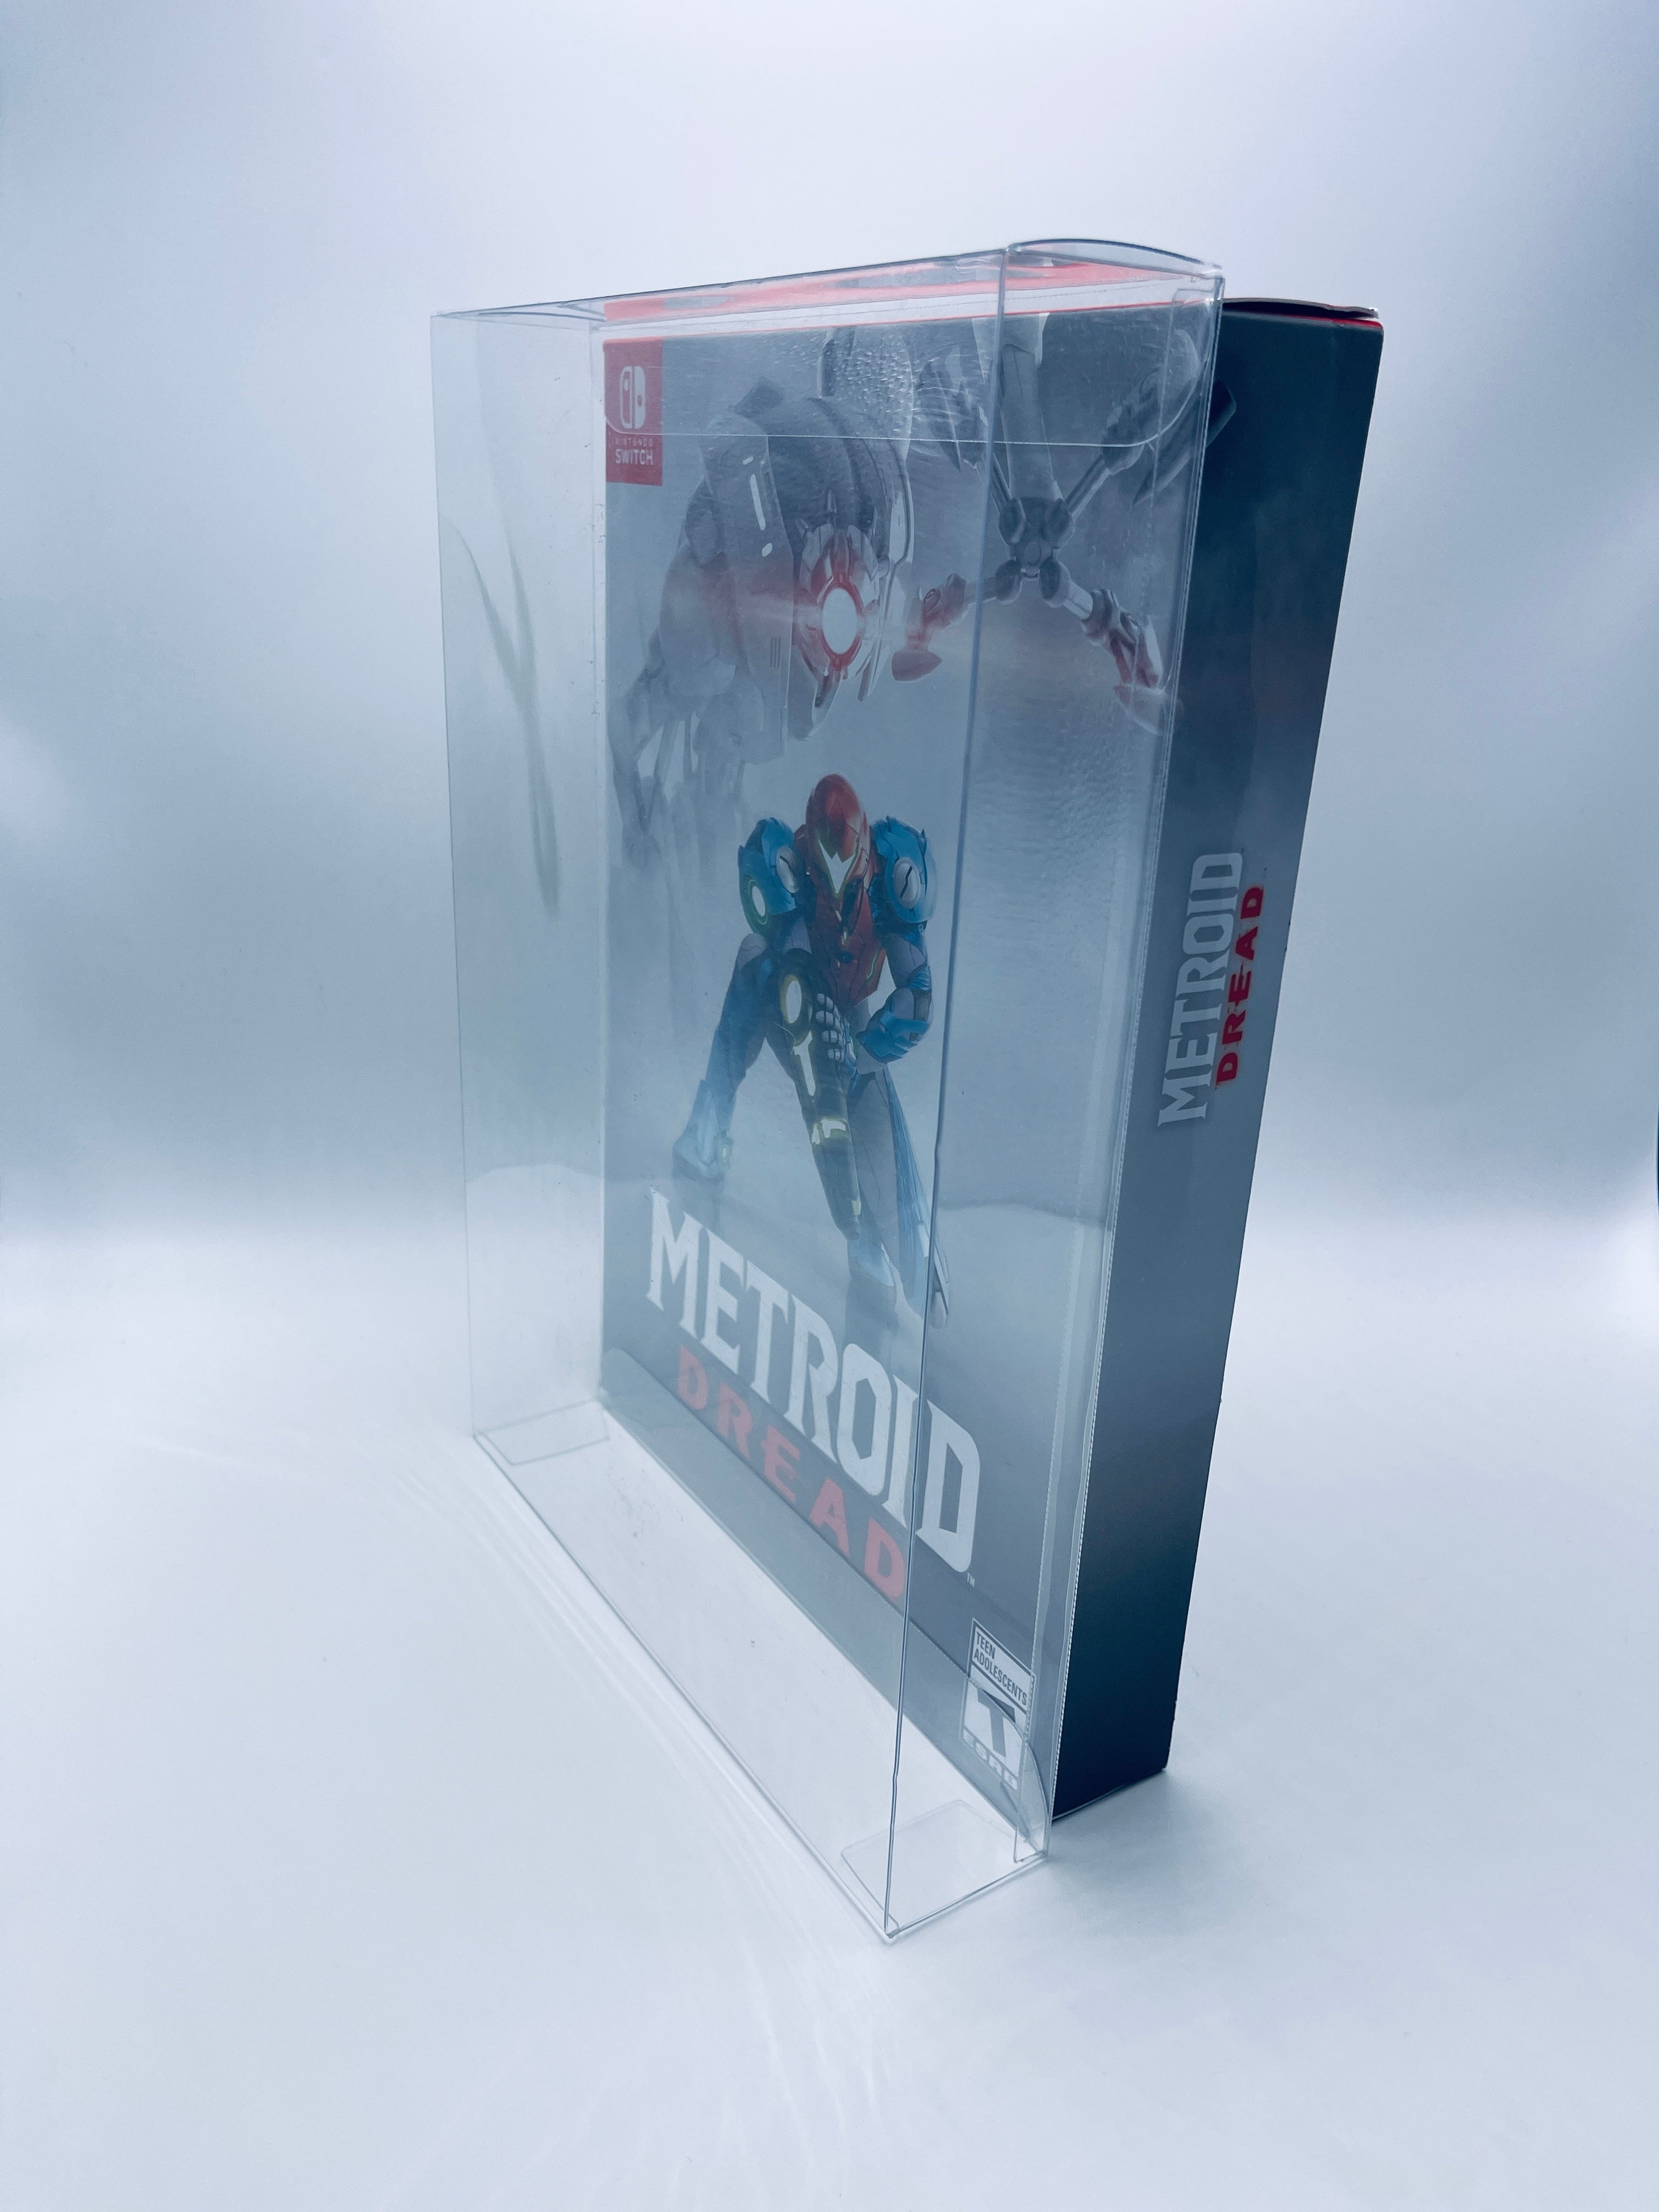 Protectors Special Kollector Nintendo Dread made with Switch Edition Box Protector – Metroid